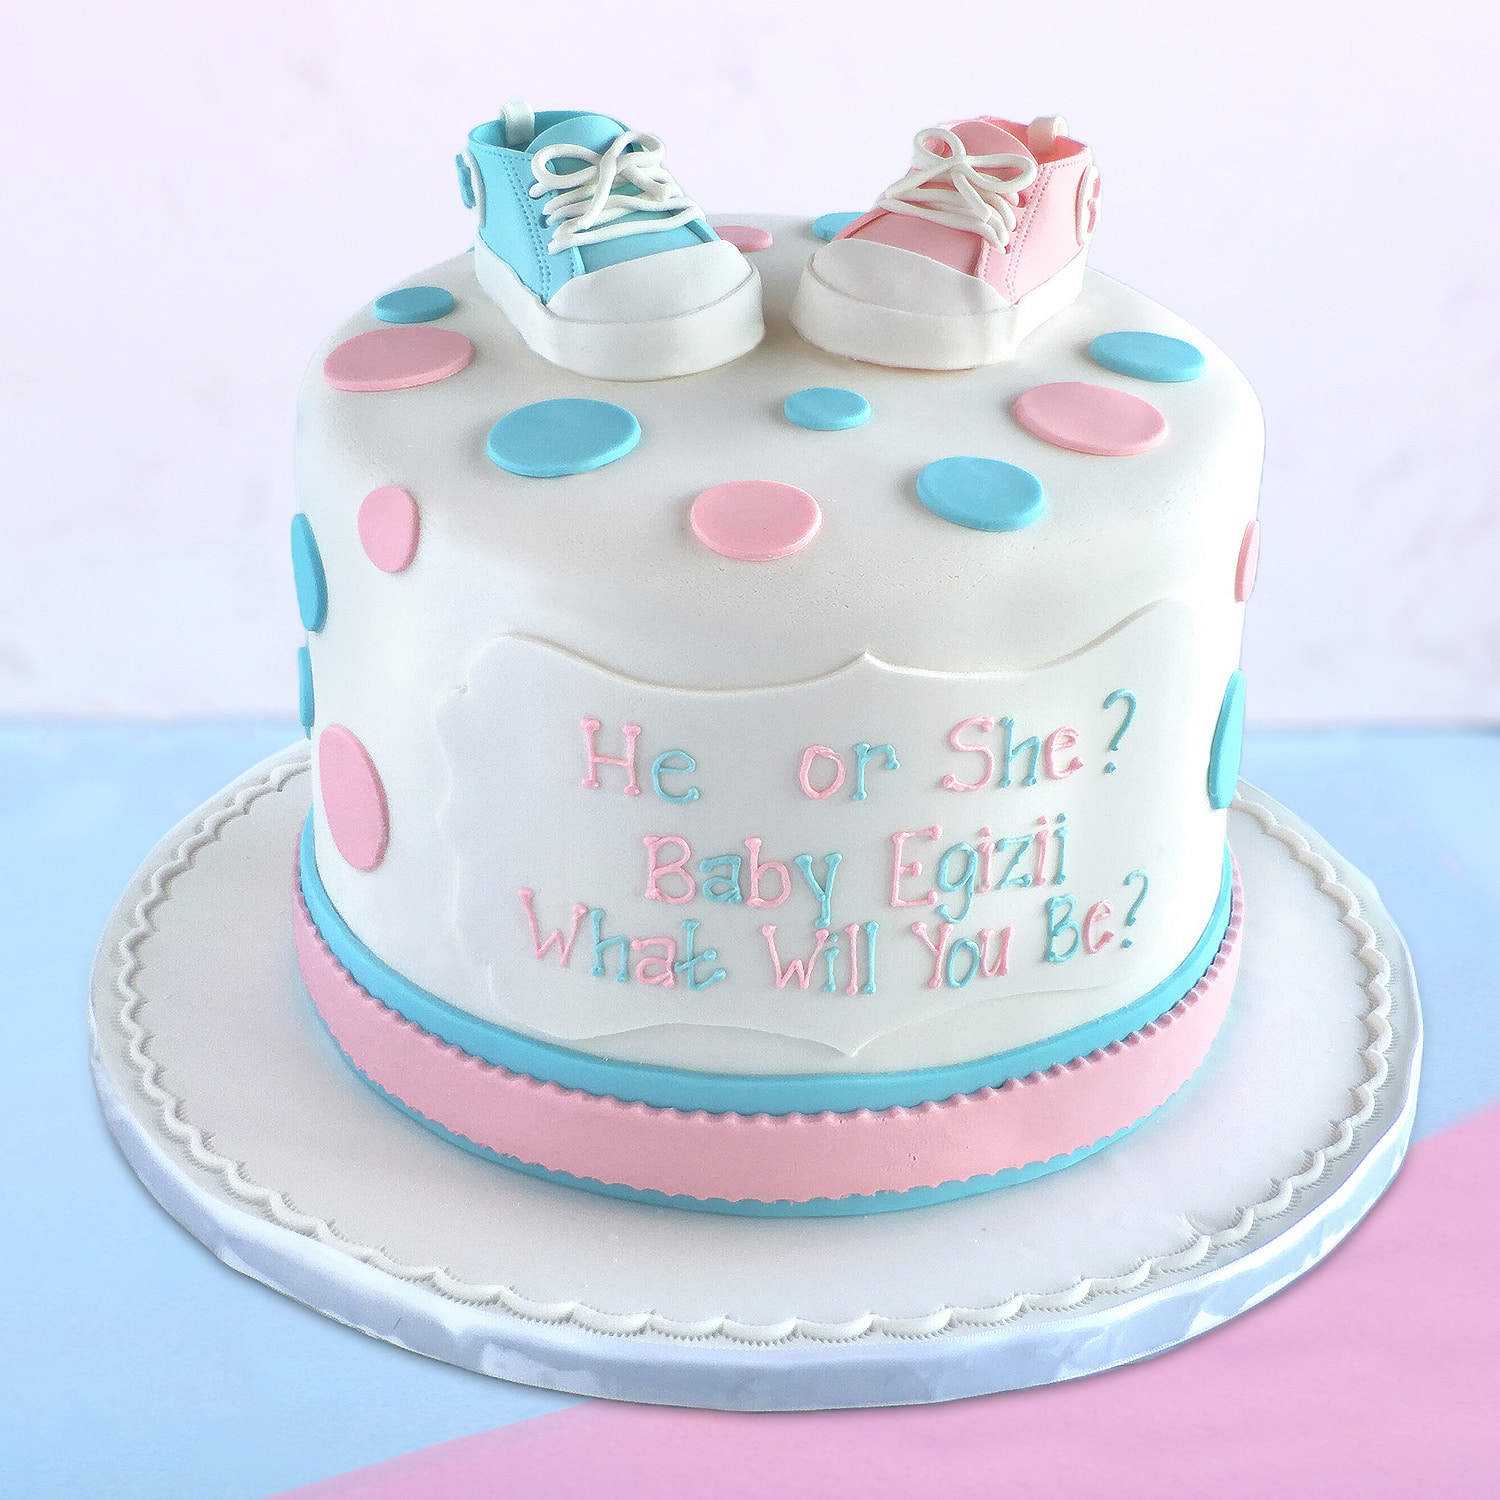 3D Baby Shower cake - Decorated Cake by Martin Brown - CakesDecor